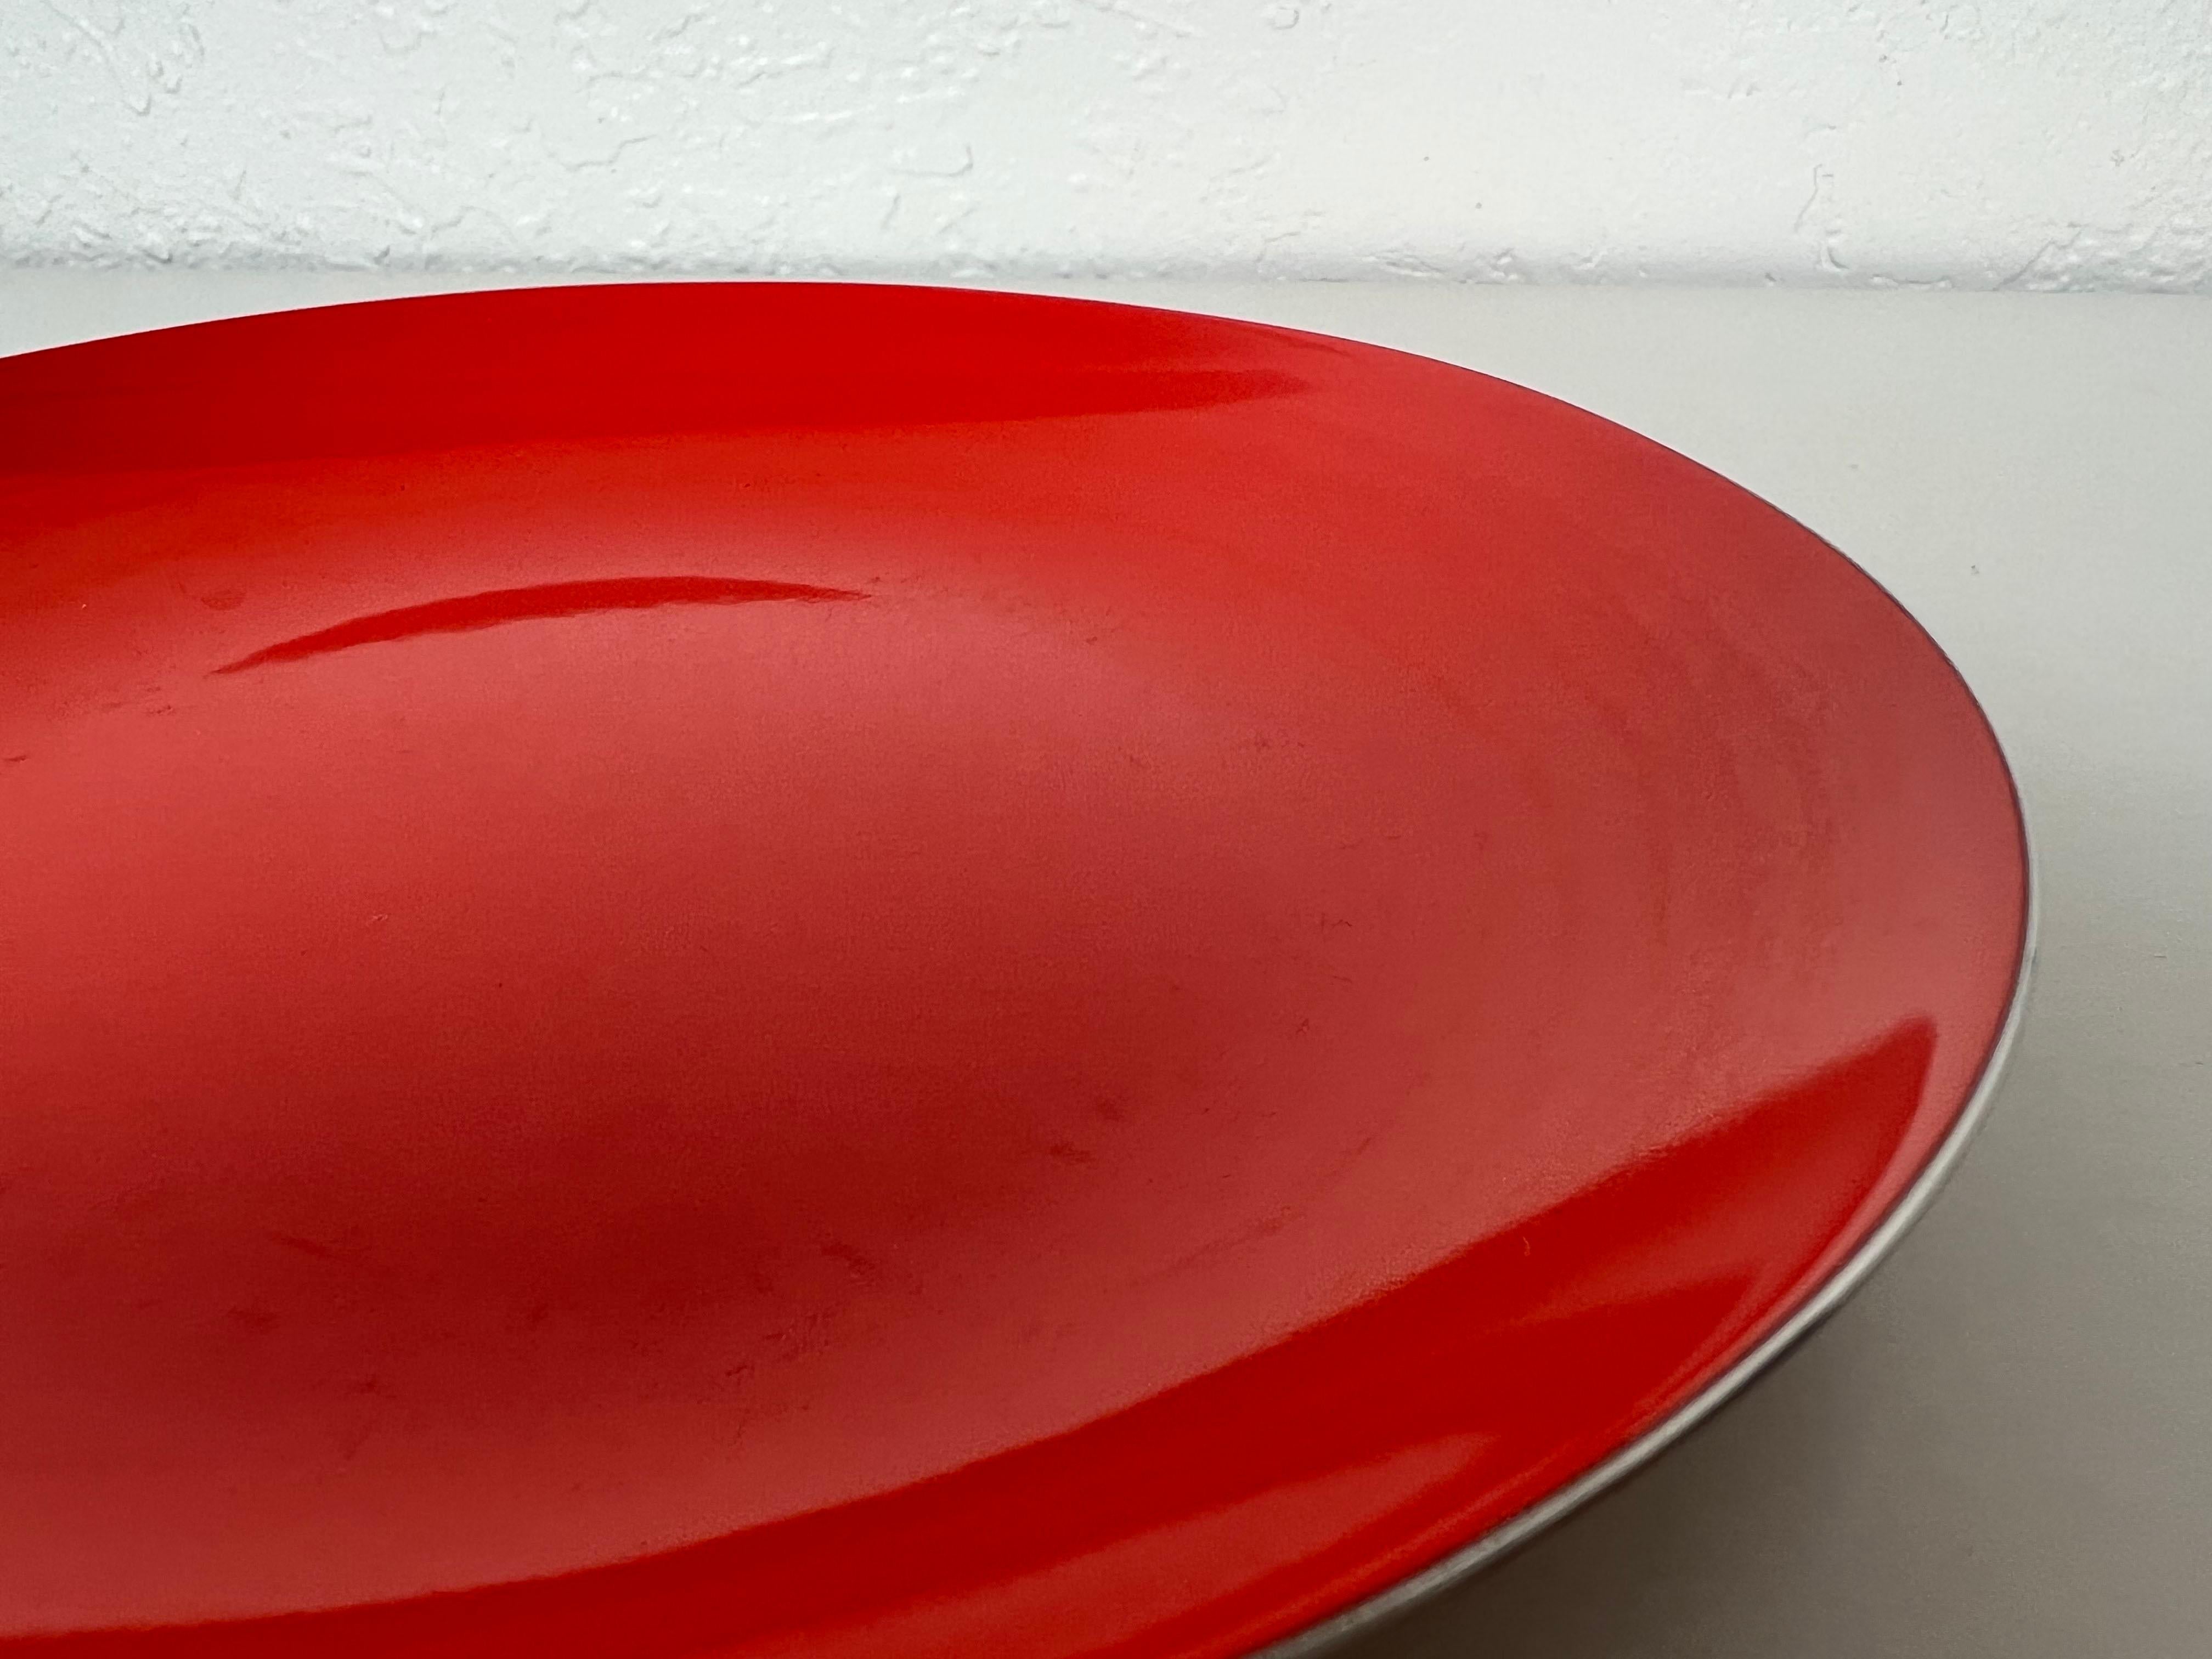 Enameled Red Metal Bowl by Leif Wessmann for Knoll International 1